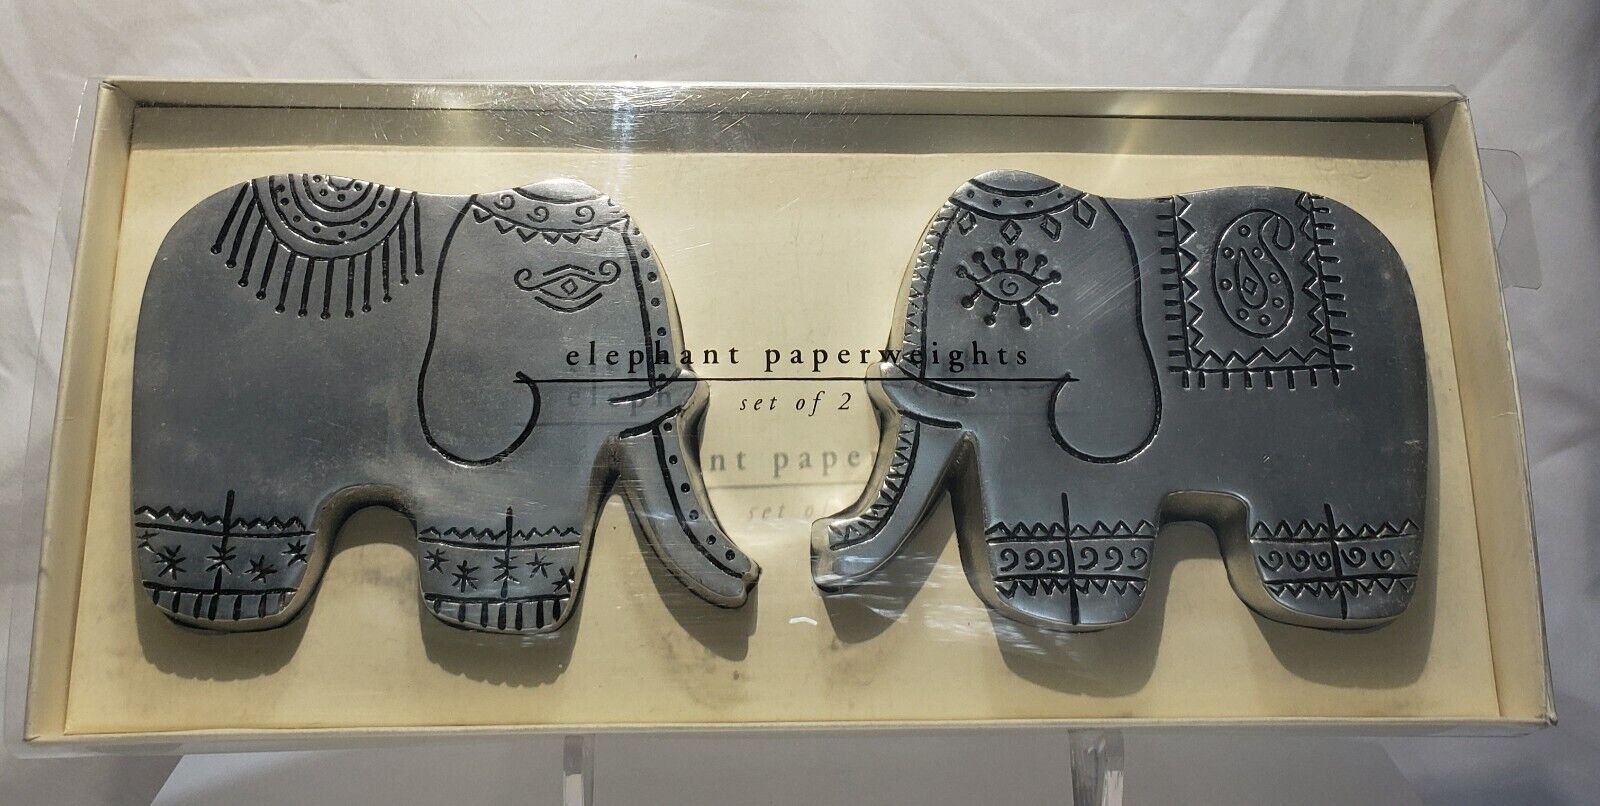 New - Pier 1 Imports 2-Silver-toned Metal Elephant Paperweights Made in India